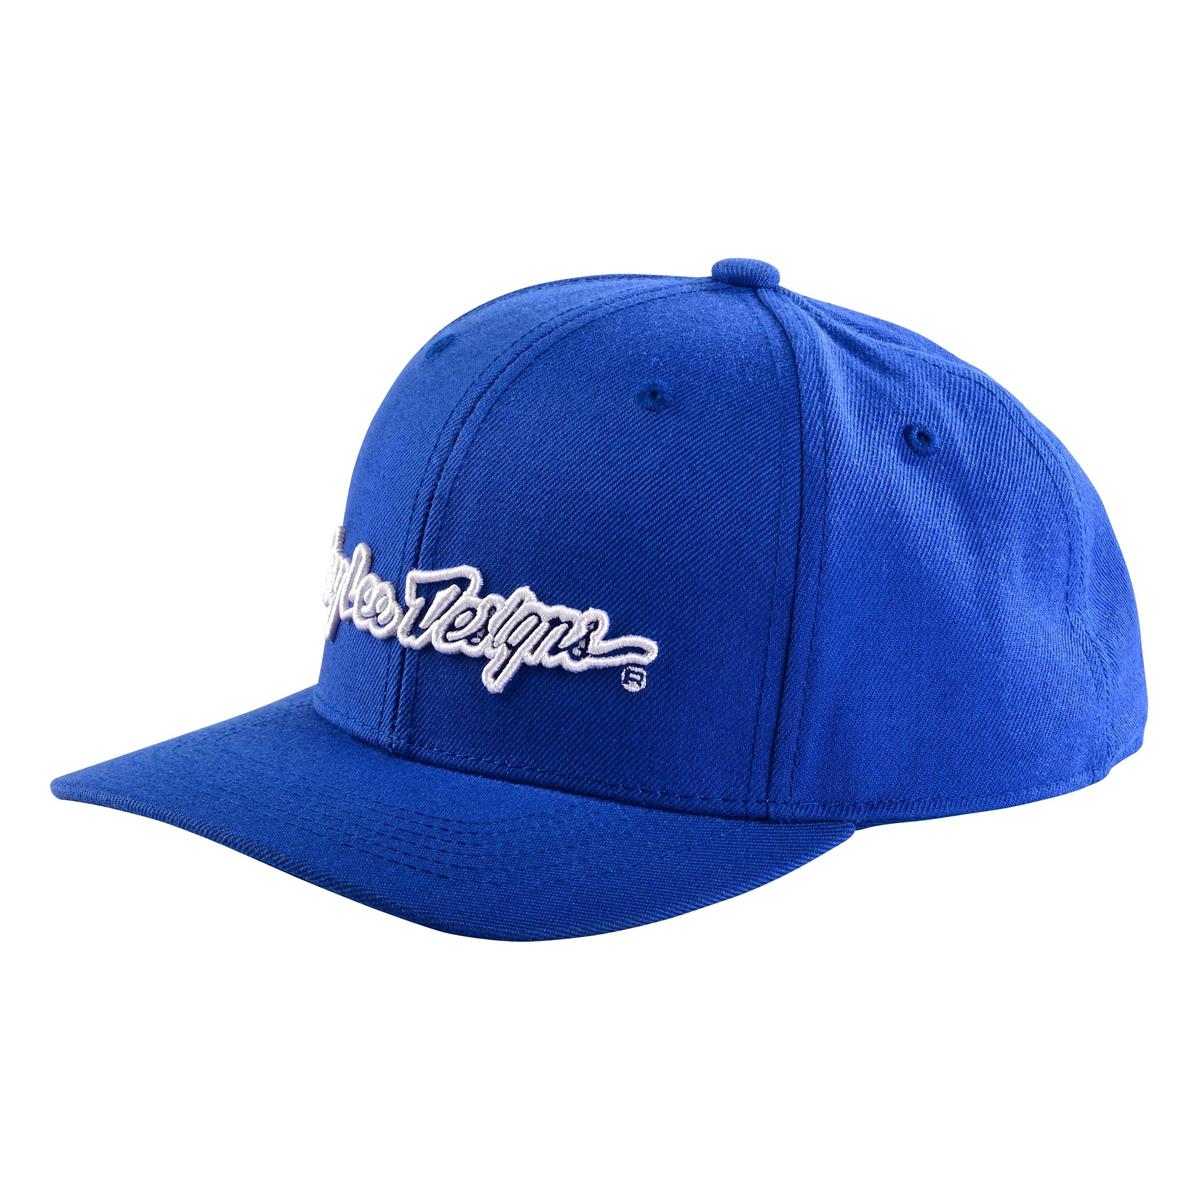 Troy Lee Designs 9Fifty Snapback Cap Signature Blue/White